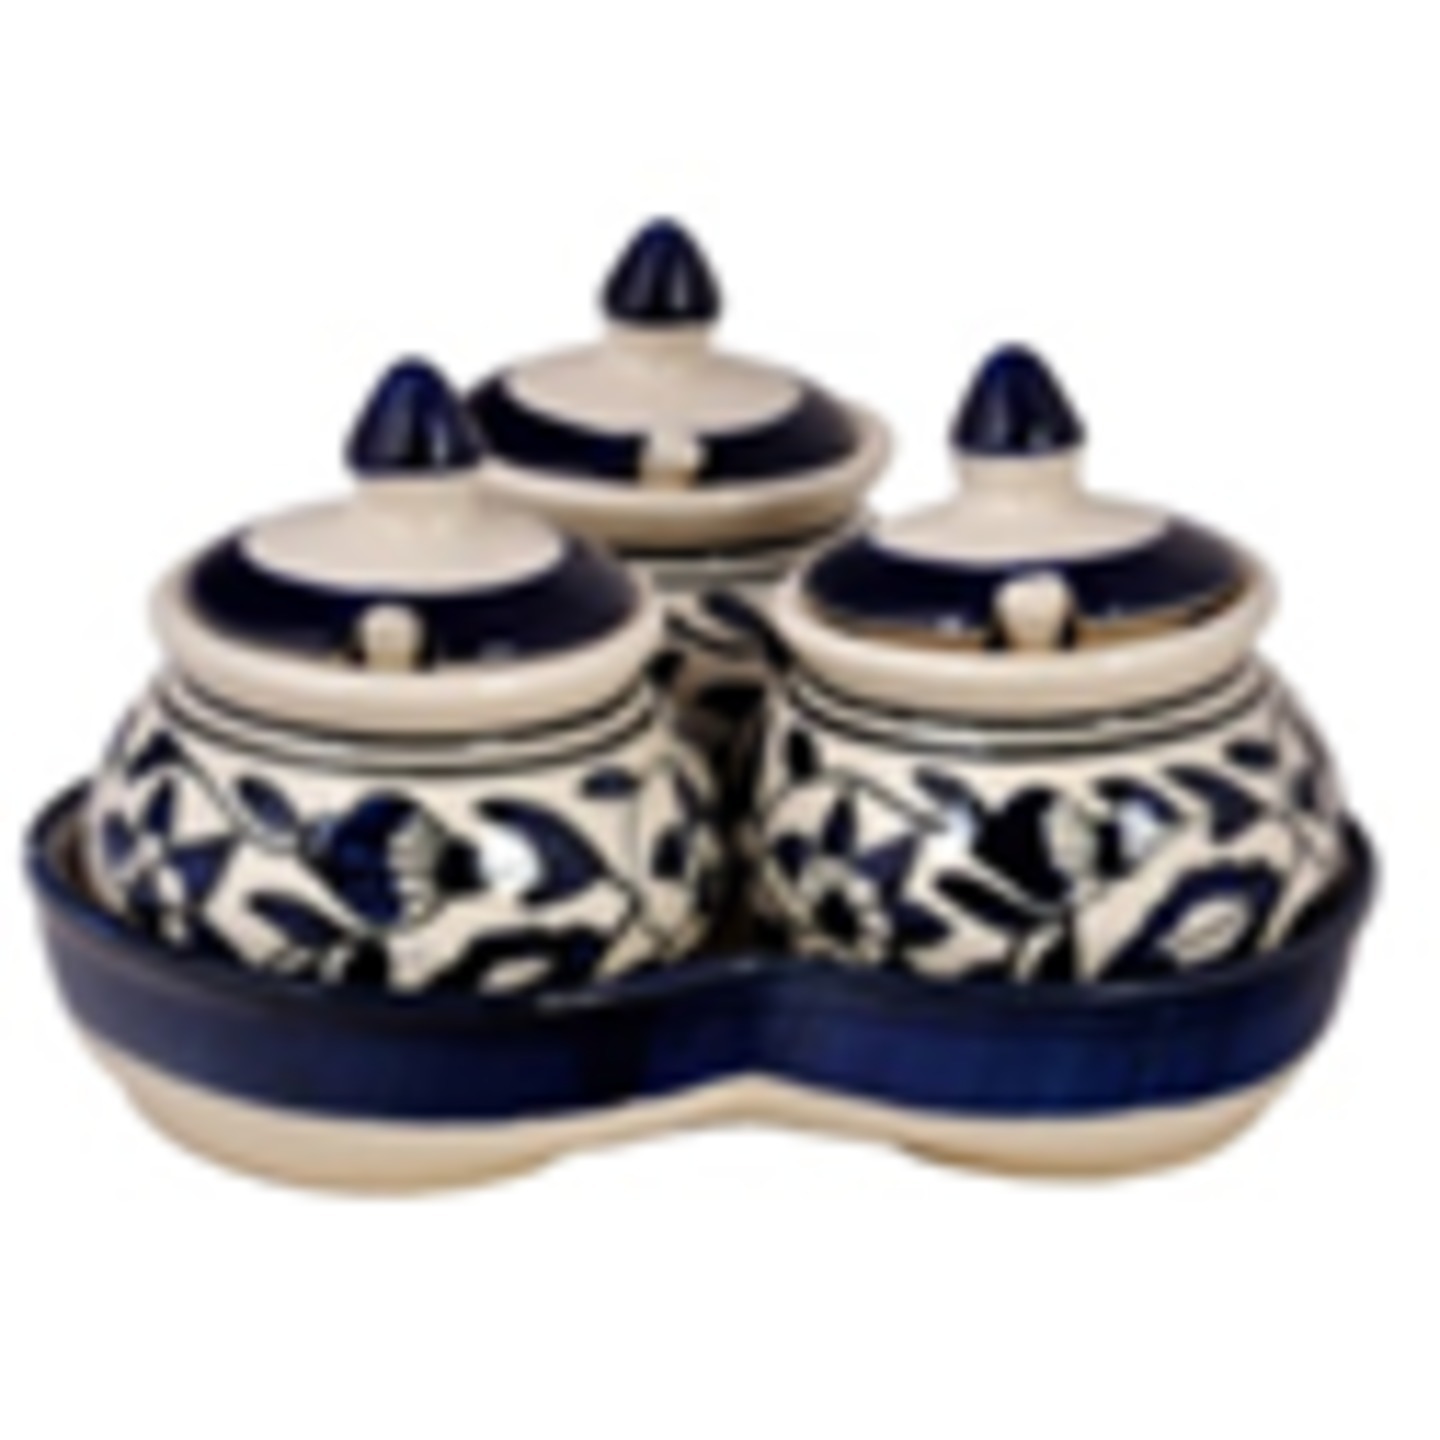 artDdecor Pickle Jar set 3 jars with lids, 3 spoons, 1 tray   Hand painted blue pottery  Achar serving Jar set for dinning table  Durable long lasting